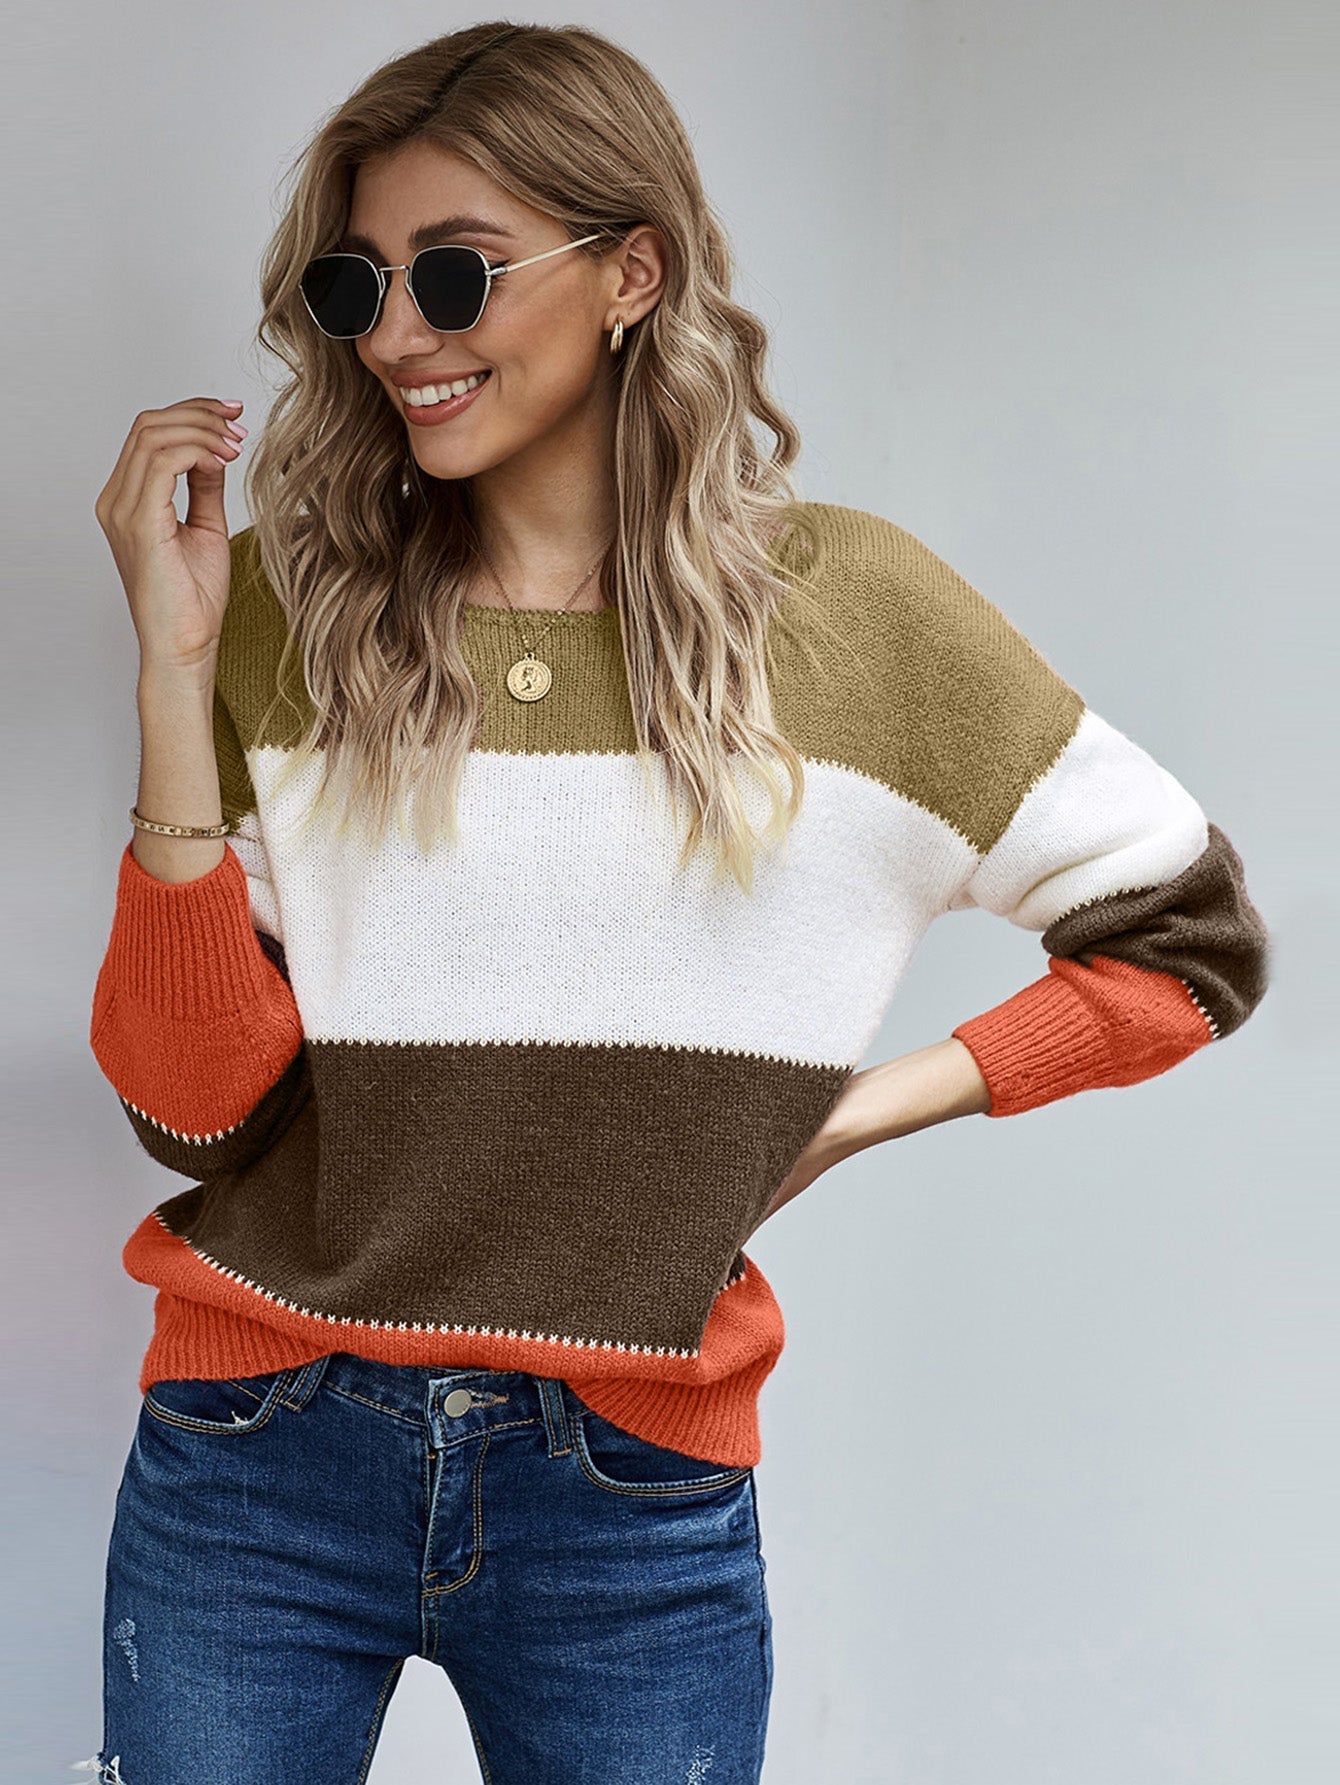 Women's Casual Loose Long Sleeve Colorblock Crewneck Knitted Tops Chunky Sweater Sai Feel